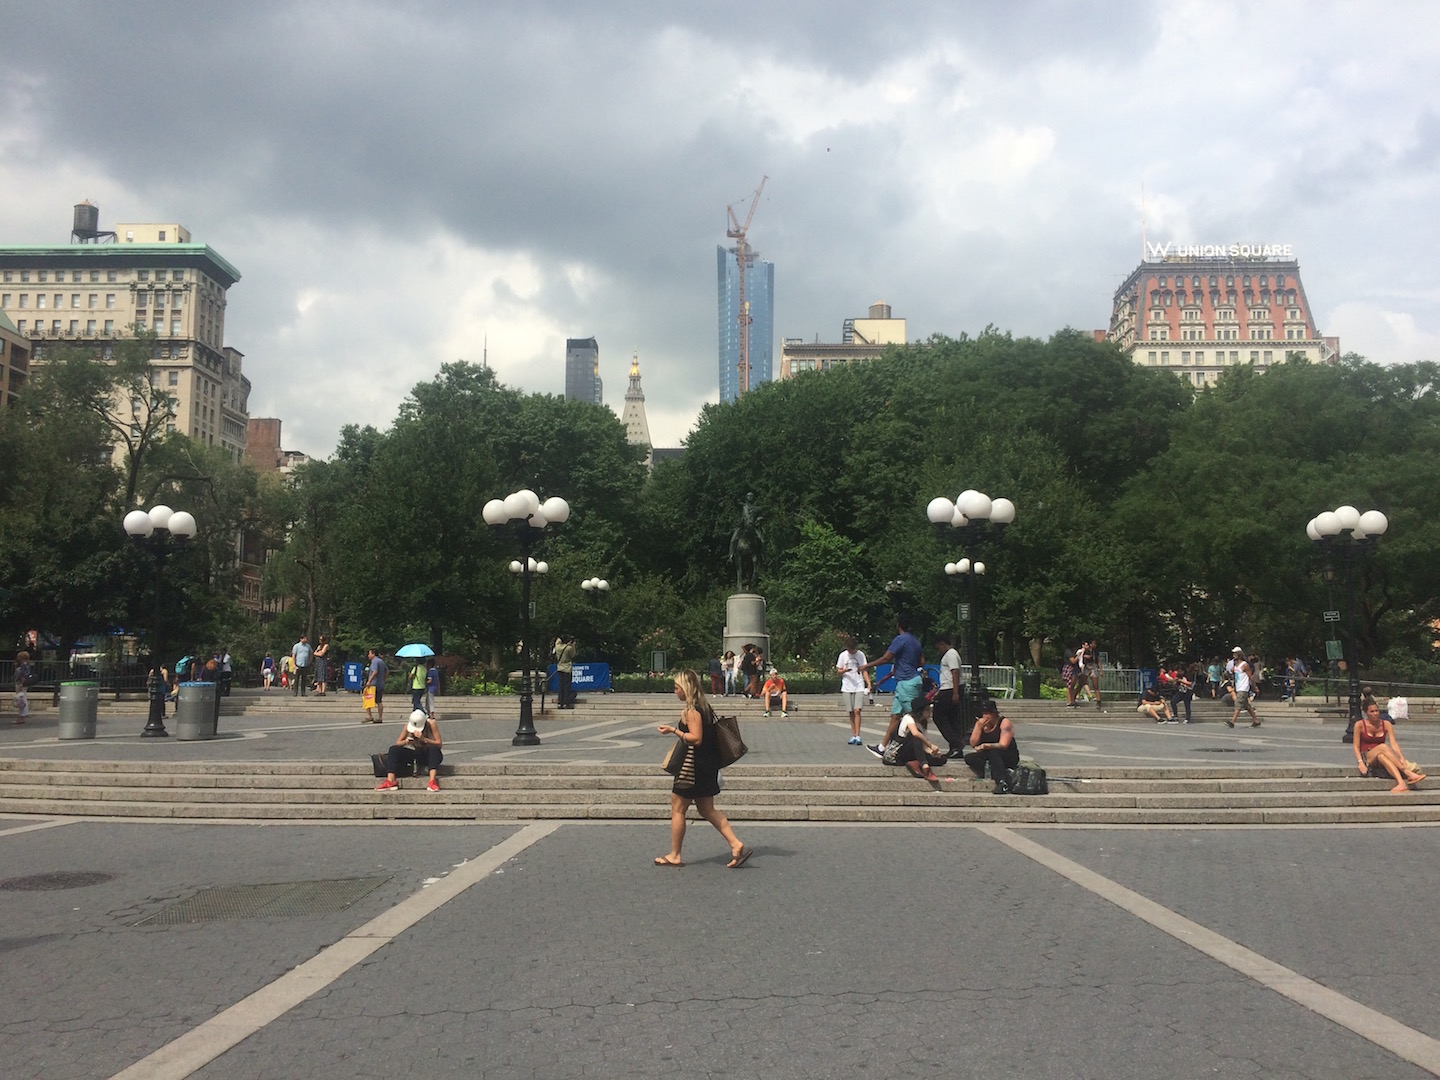 An overcast Day in Union Square with the George Washington statue in the background.